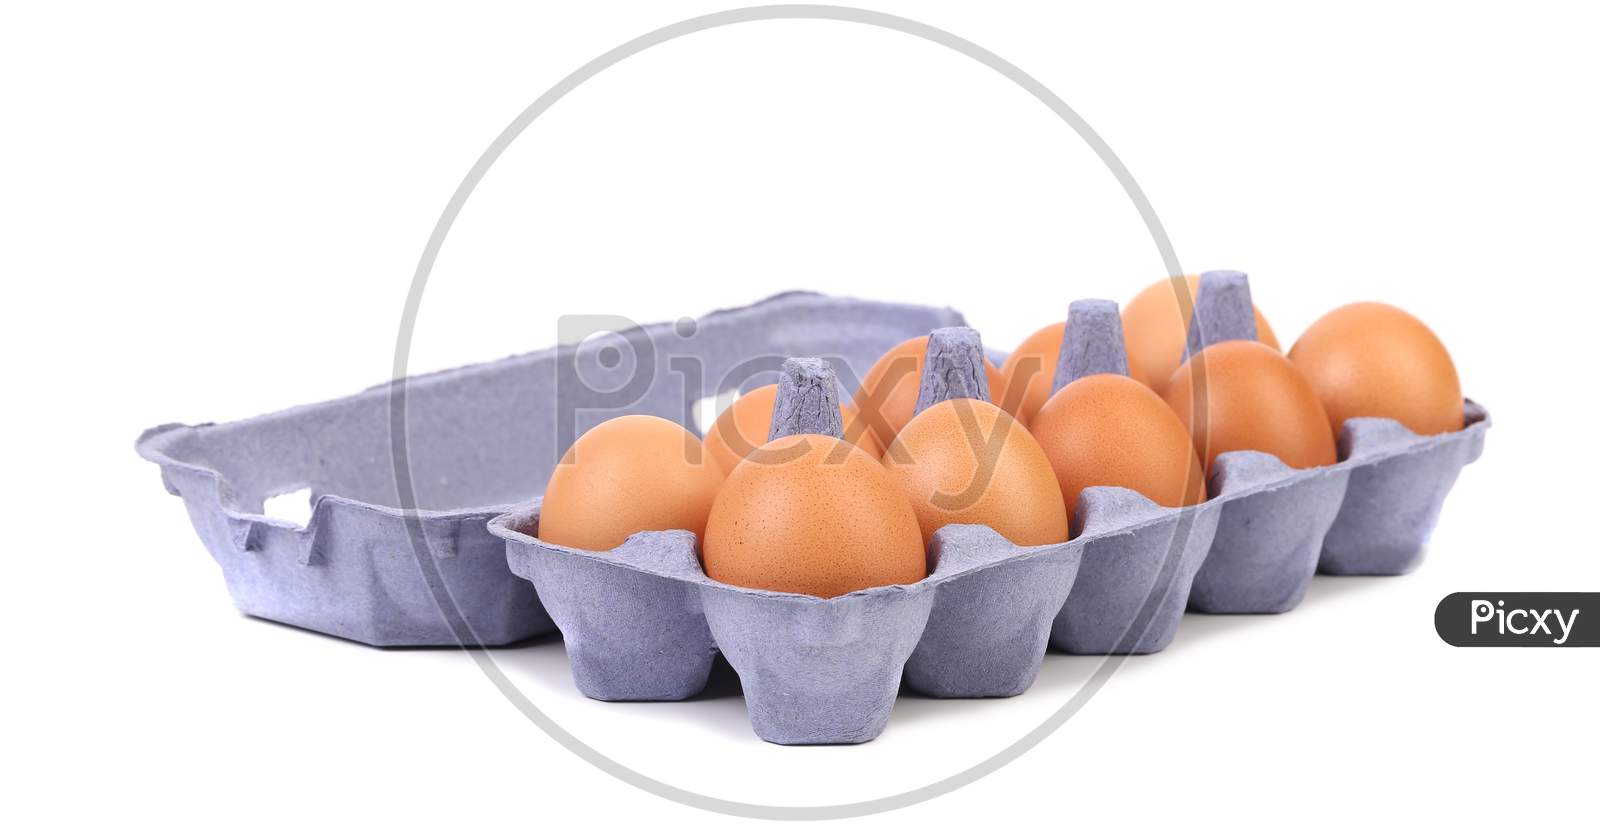 Ten Eggs In A Blue Carton Box. Isolated On A White Background.